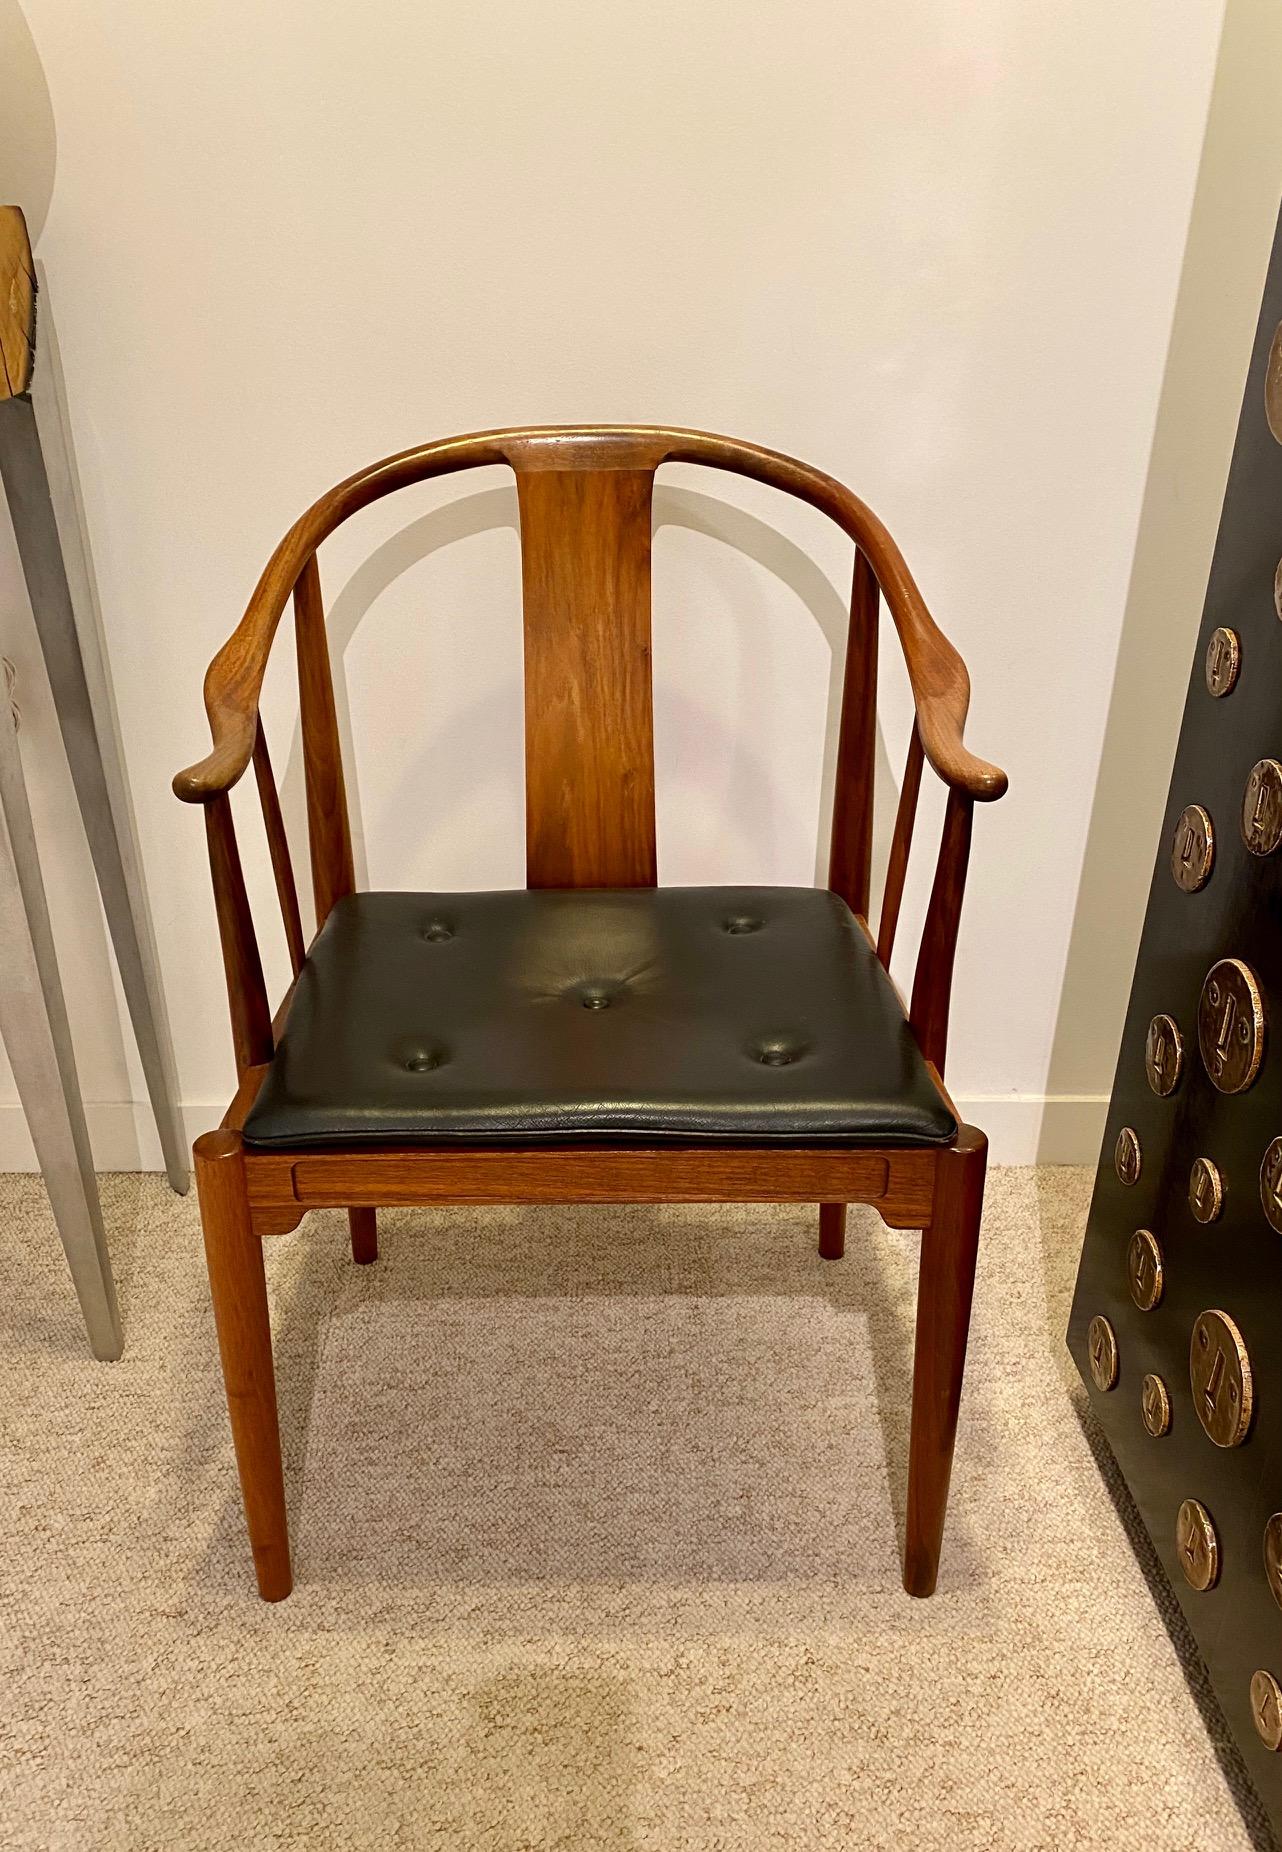 Hans J. Wegner, a 1977 Limited Edition Walnut Armchair “China Chair” For Sale 3